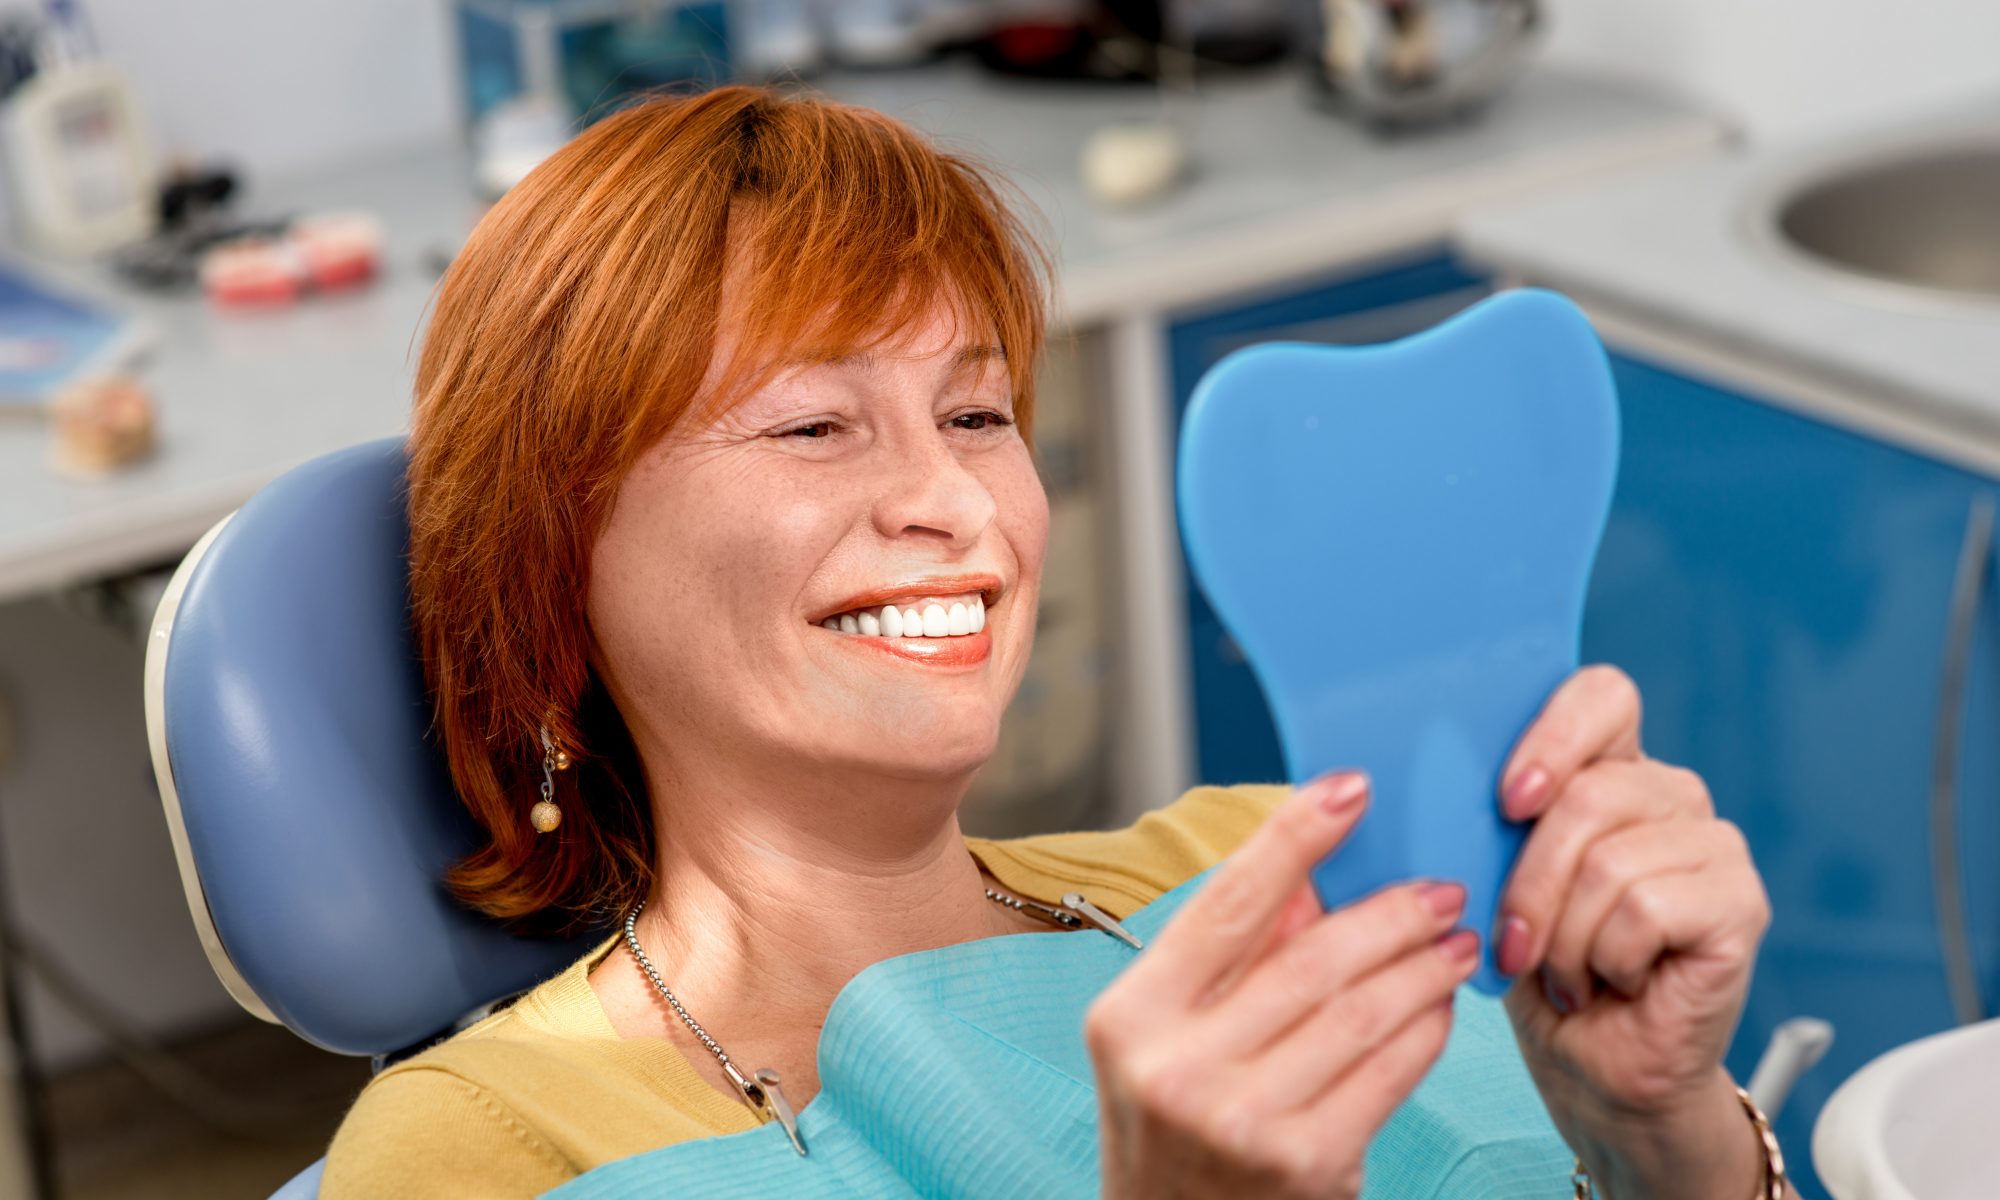 A woman smiling at her reflection because she has healthy teeth, or because she is seeing the result of dental restoration surgery